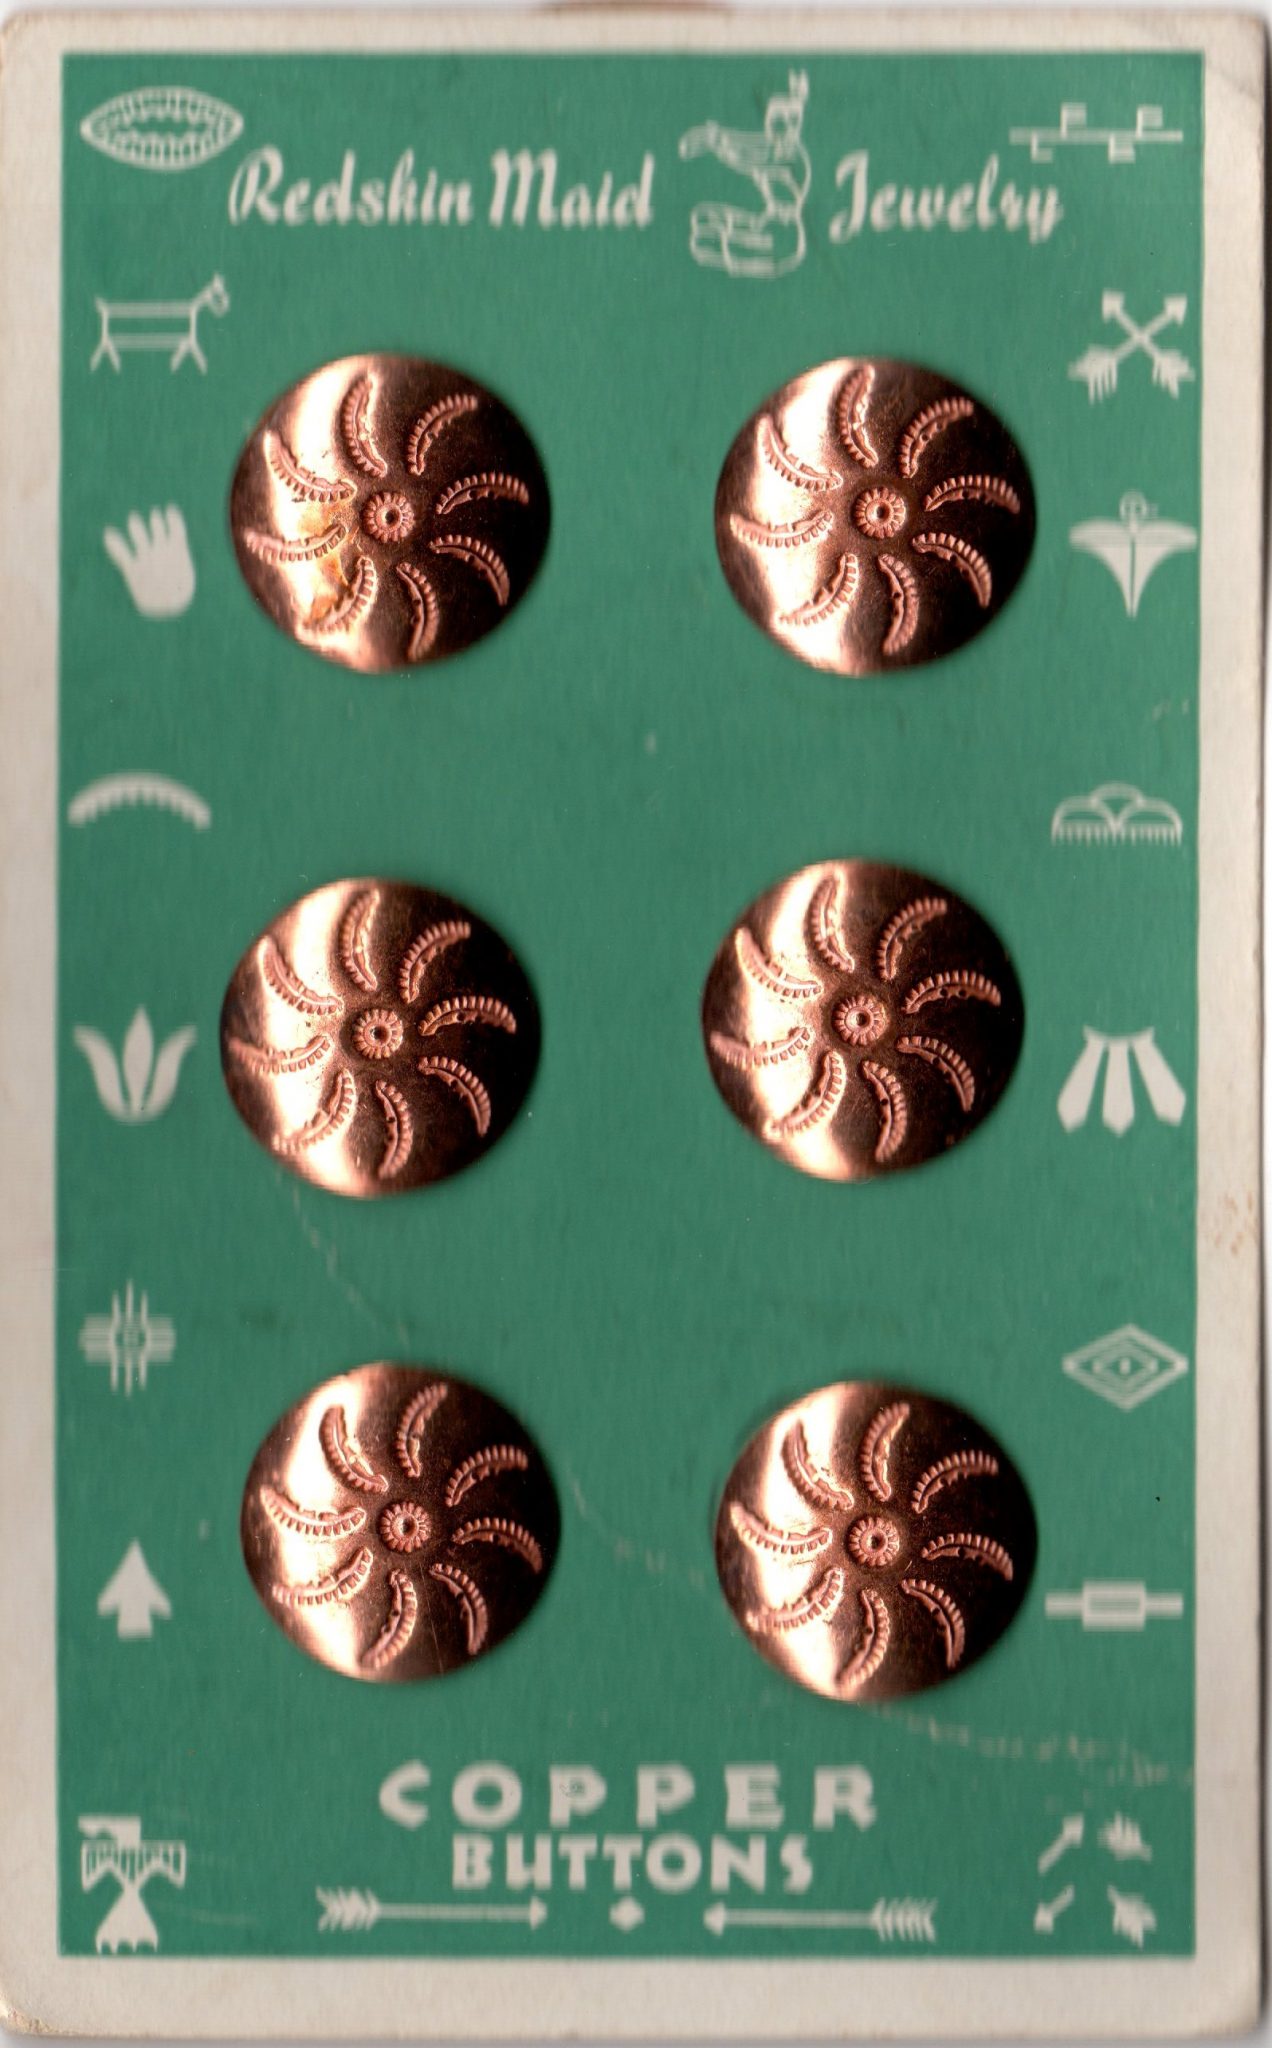 "Redskin Maid" copper buttons